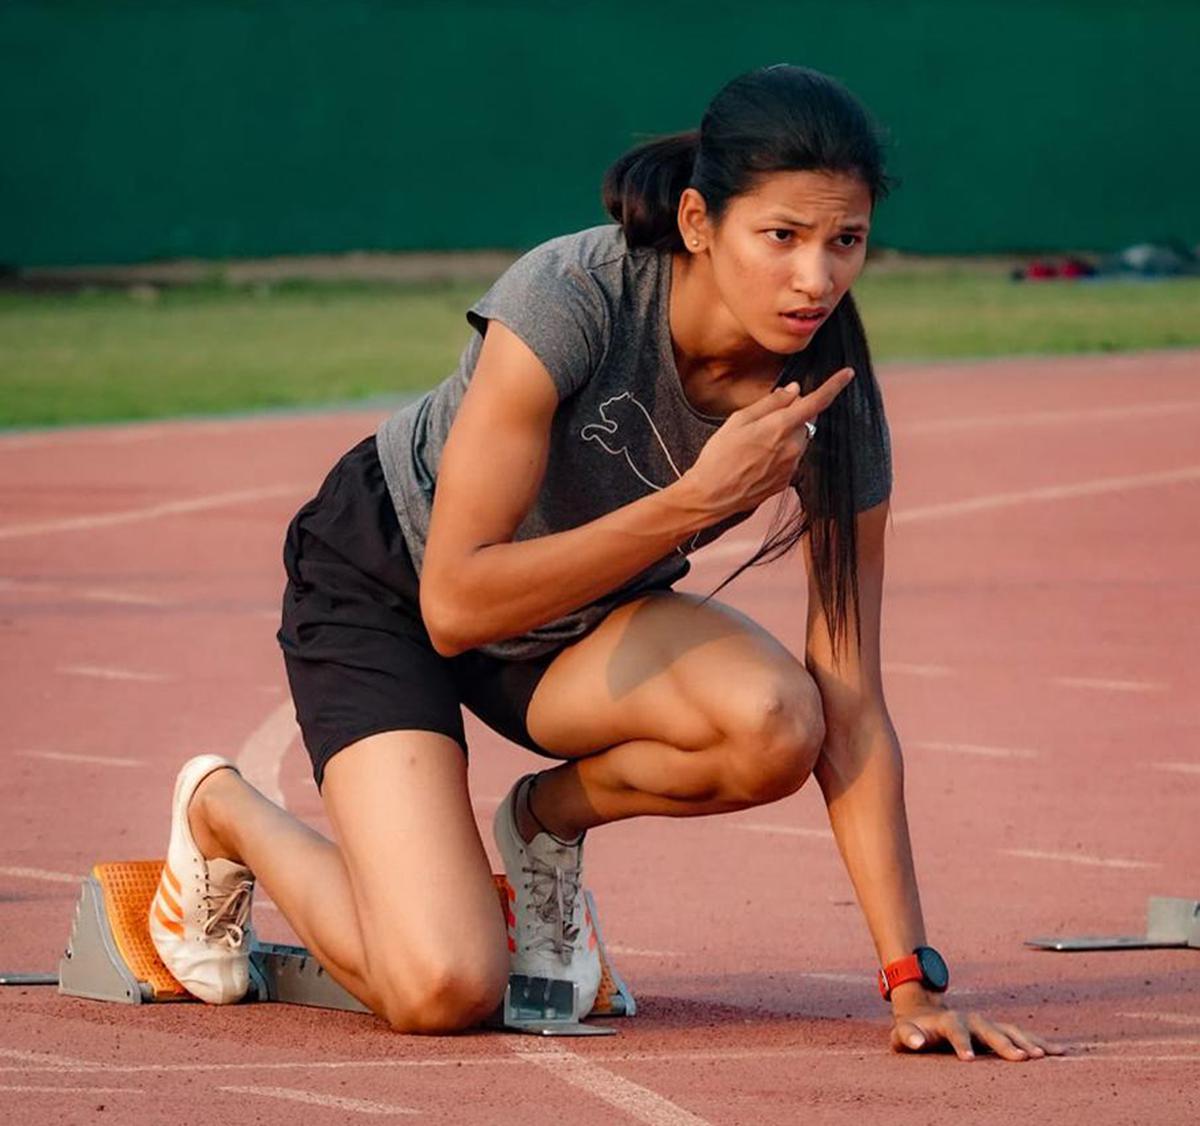 Physical gifts: Jyothi’s coaches feel that her height, long legs and strong tendons contribute to making her a natural hurdler.